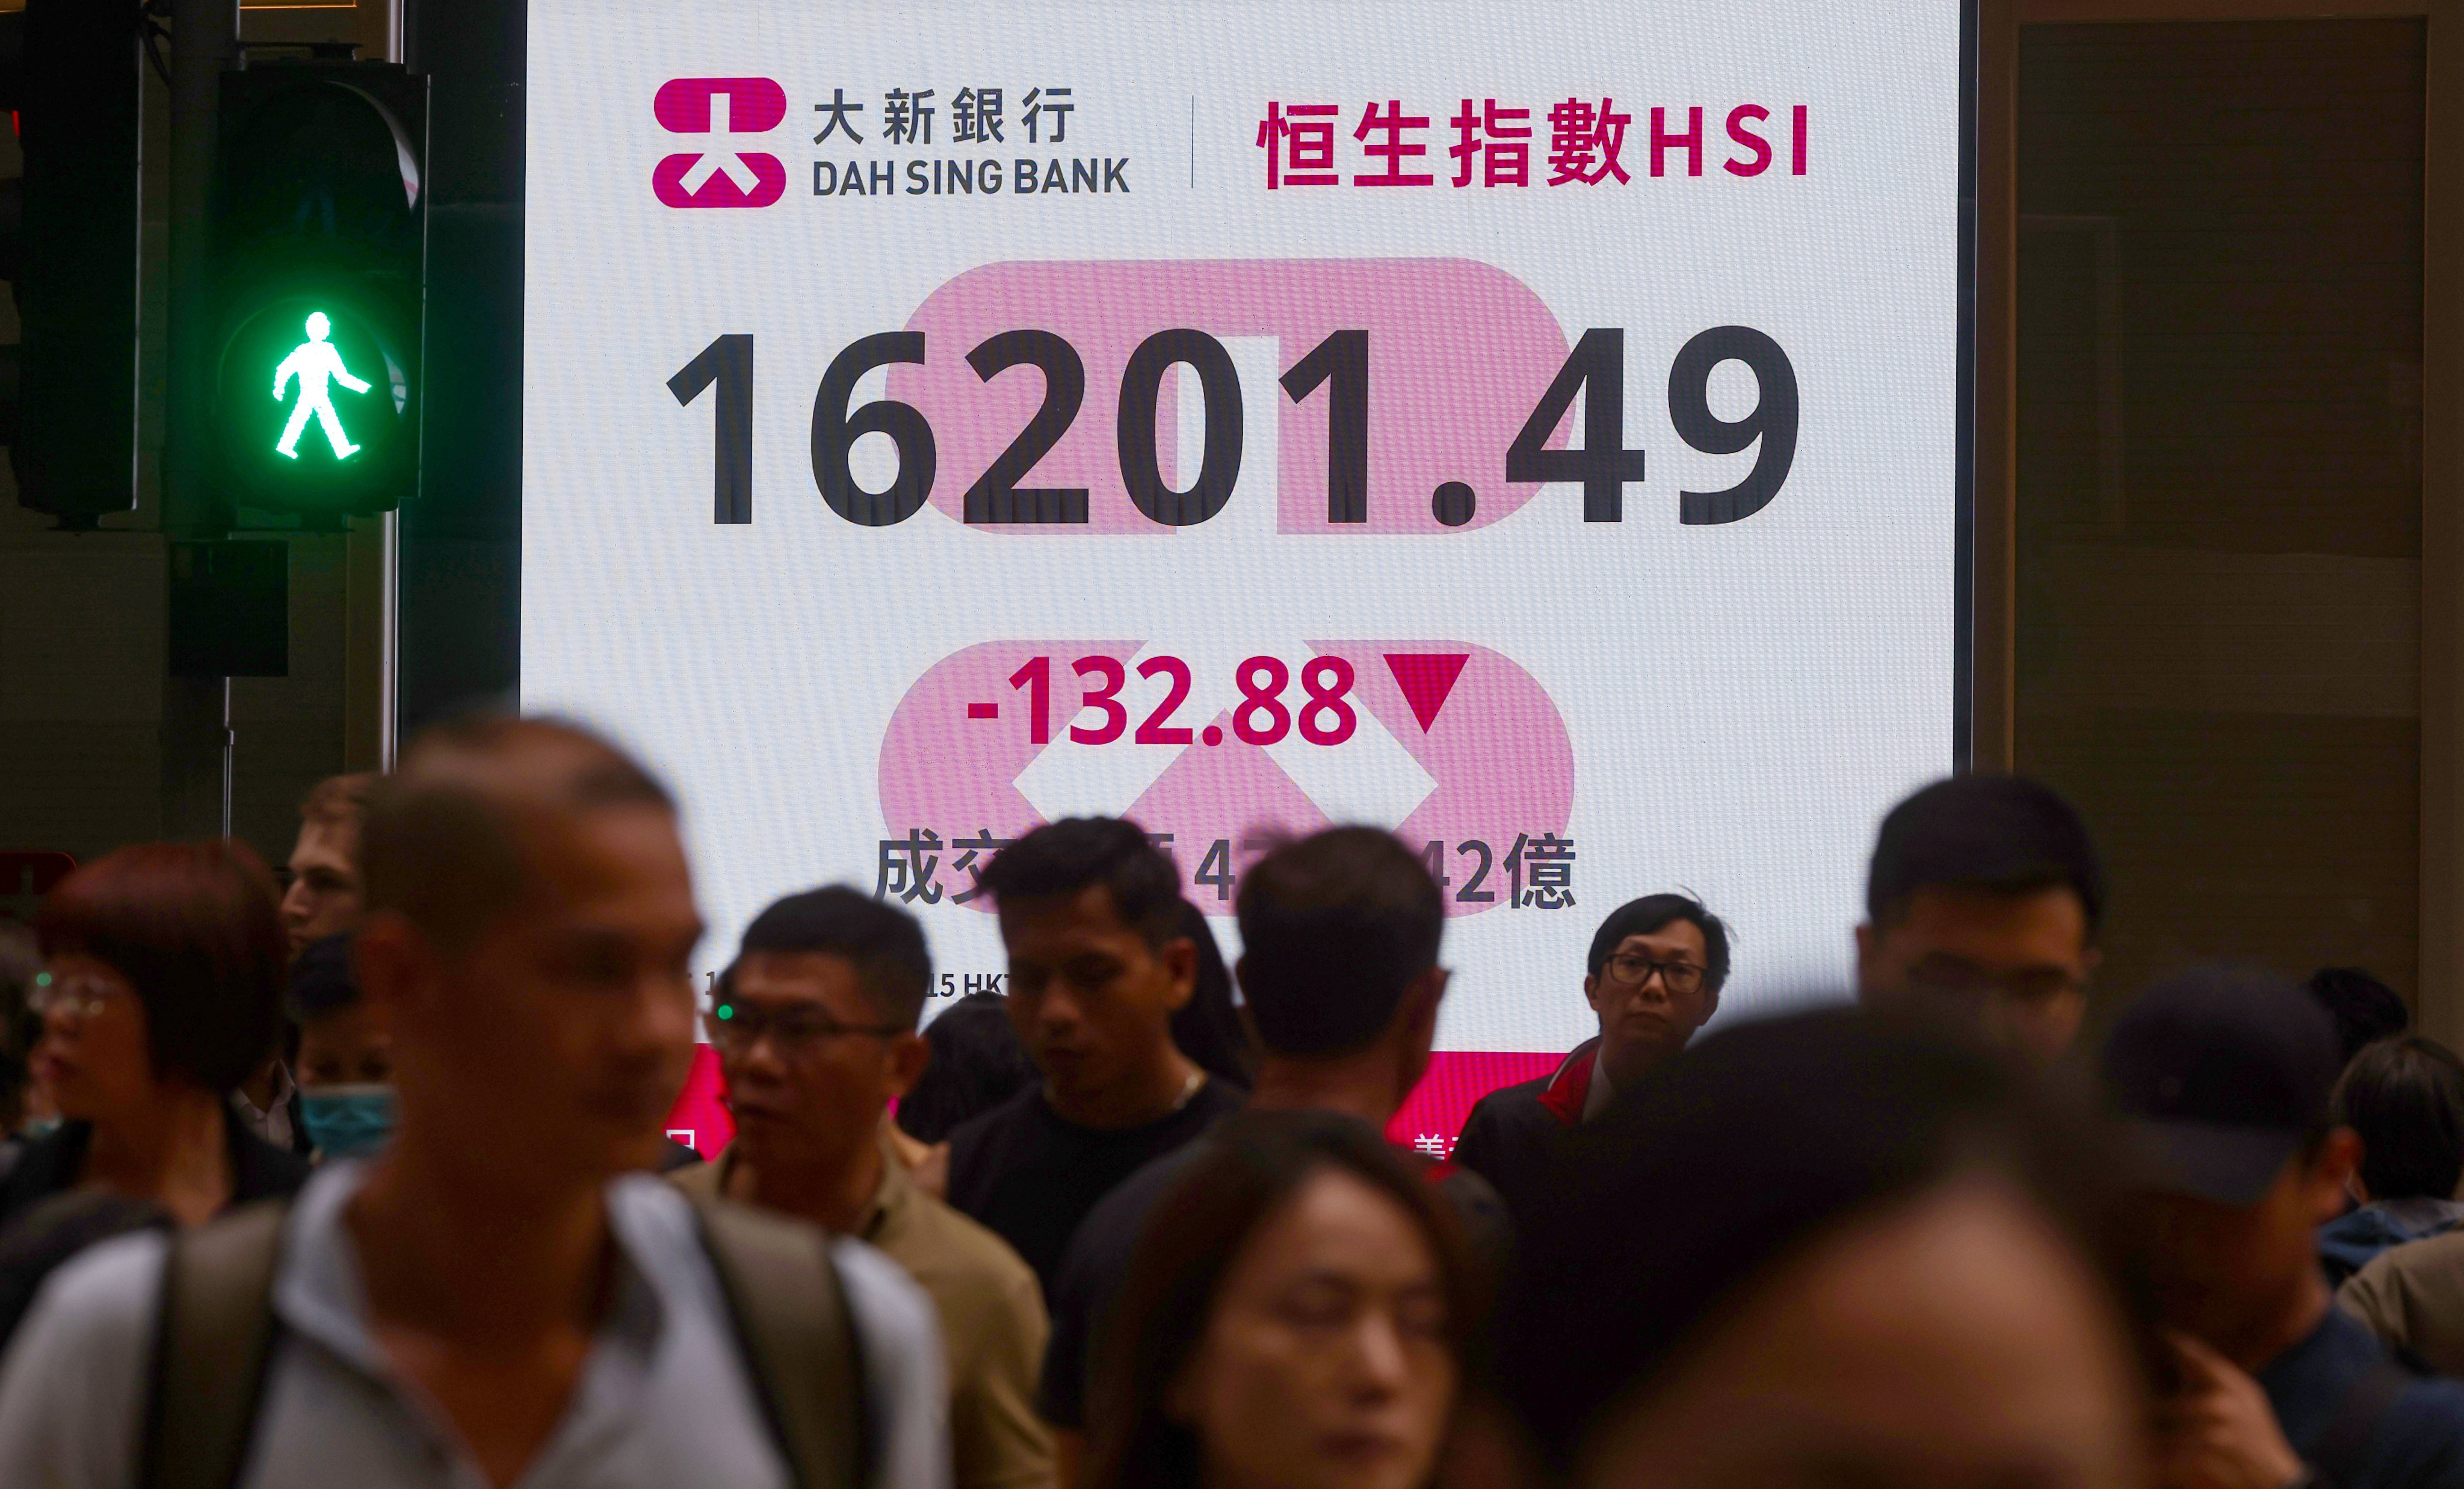 The repurchasing spree has come as the Hang Seng Index heads for an unprecedented fourth straight year of decline. Photo: Edmond So